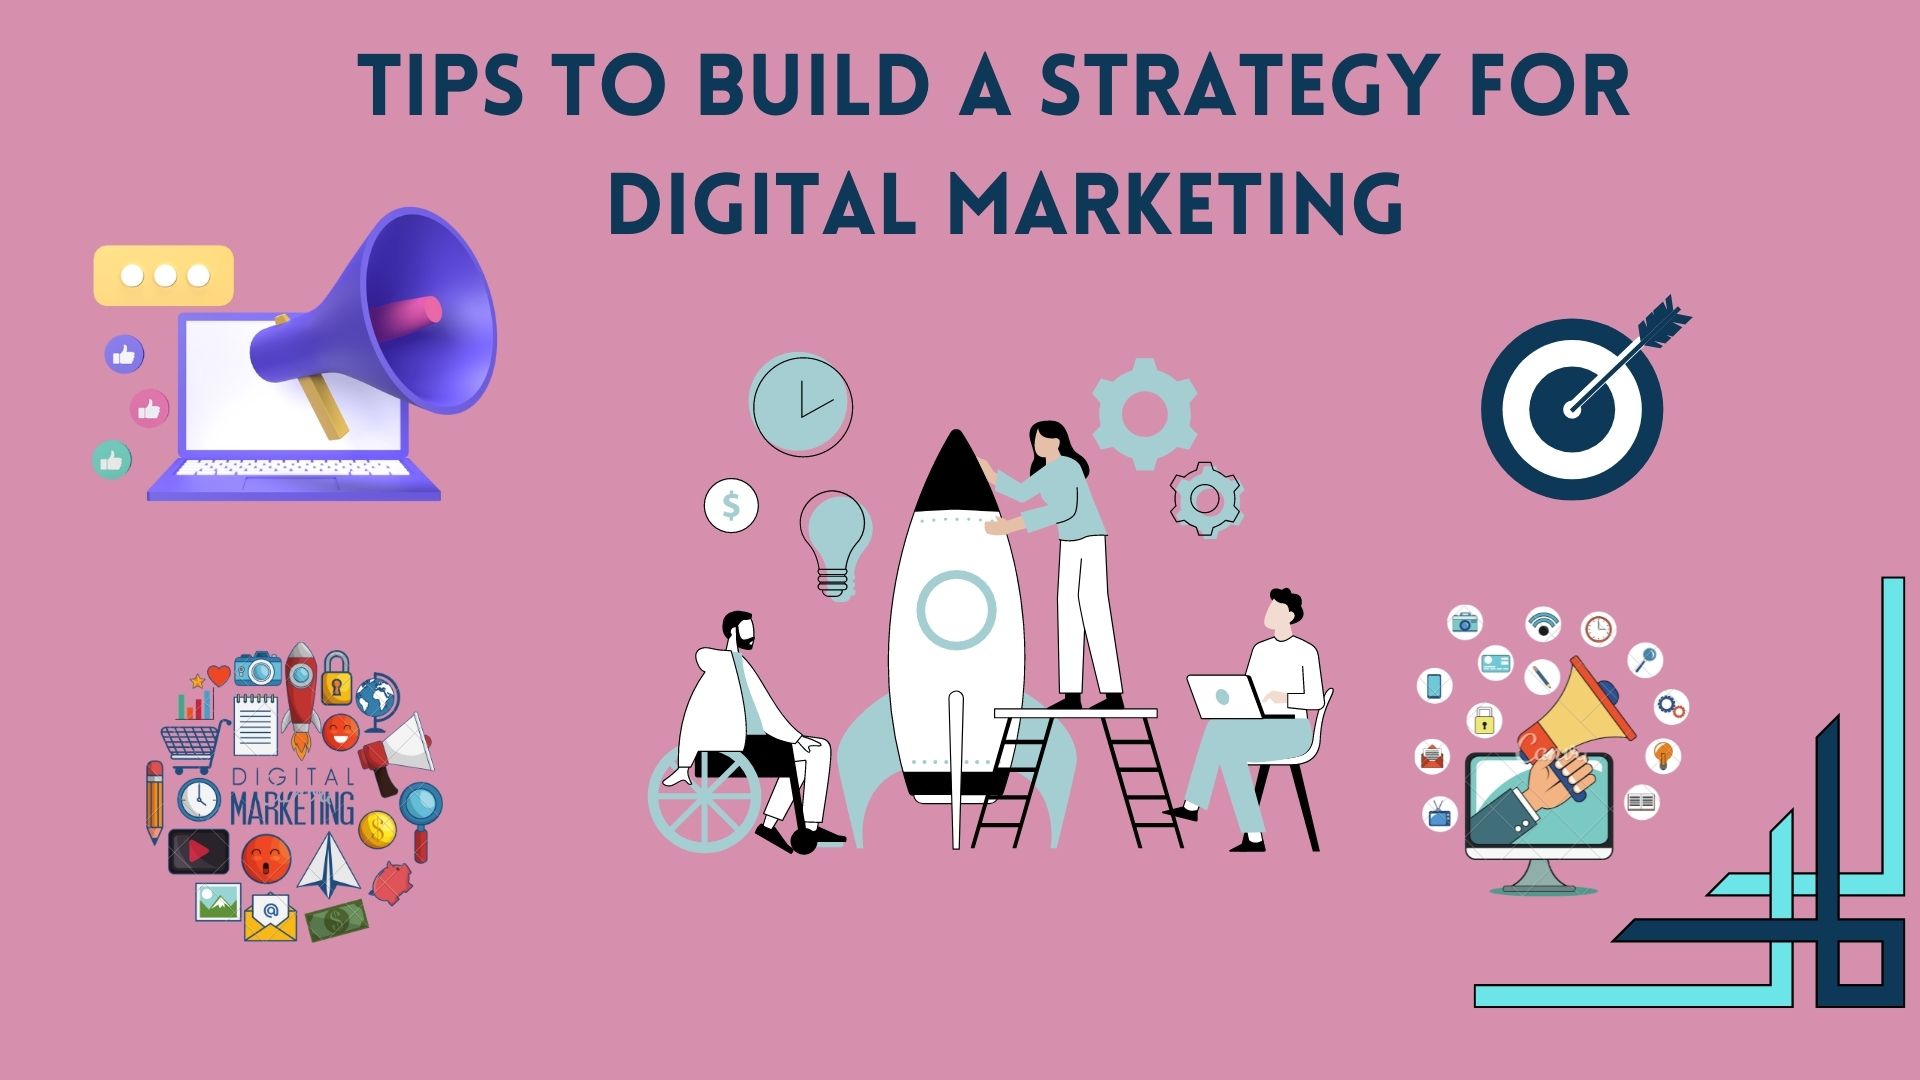 Tips to build a strategy for digital marketing